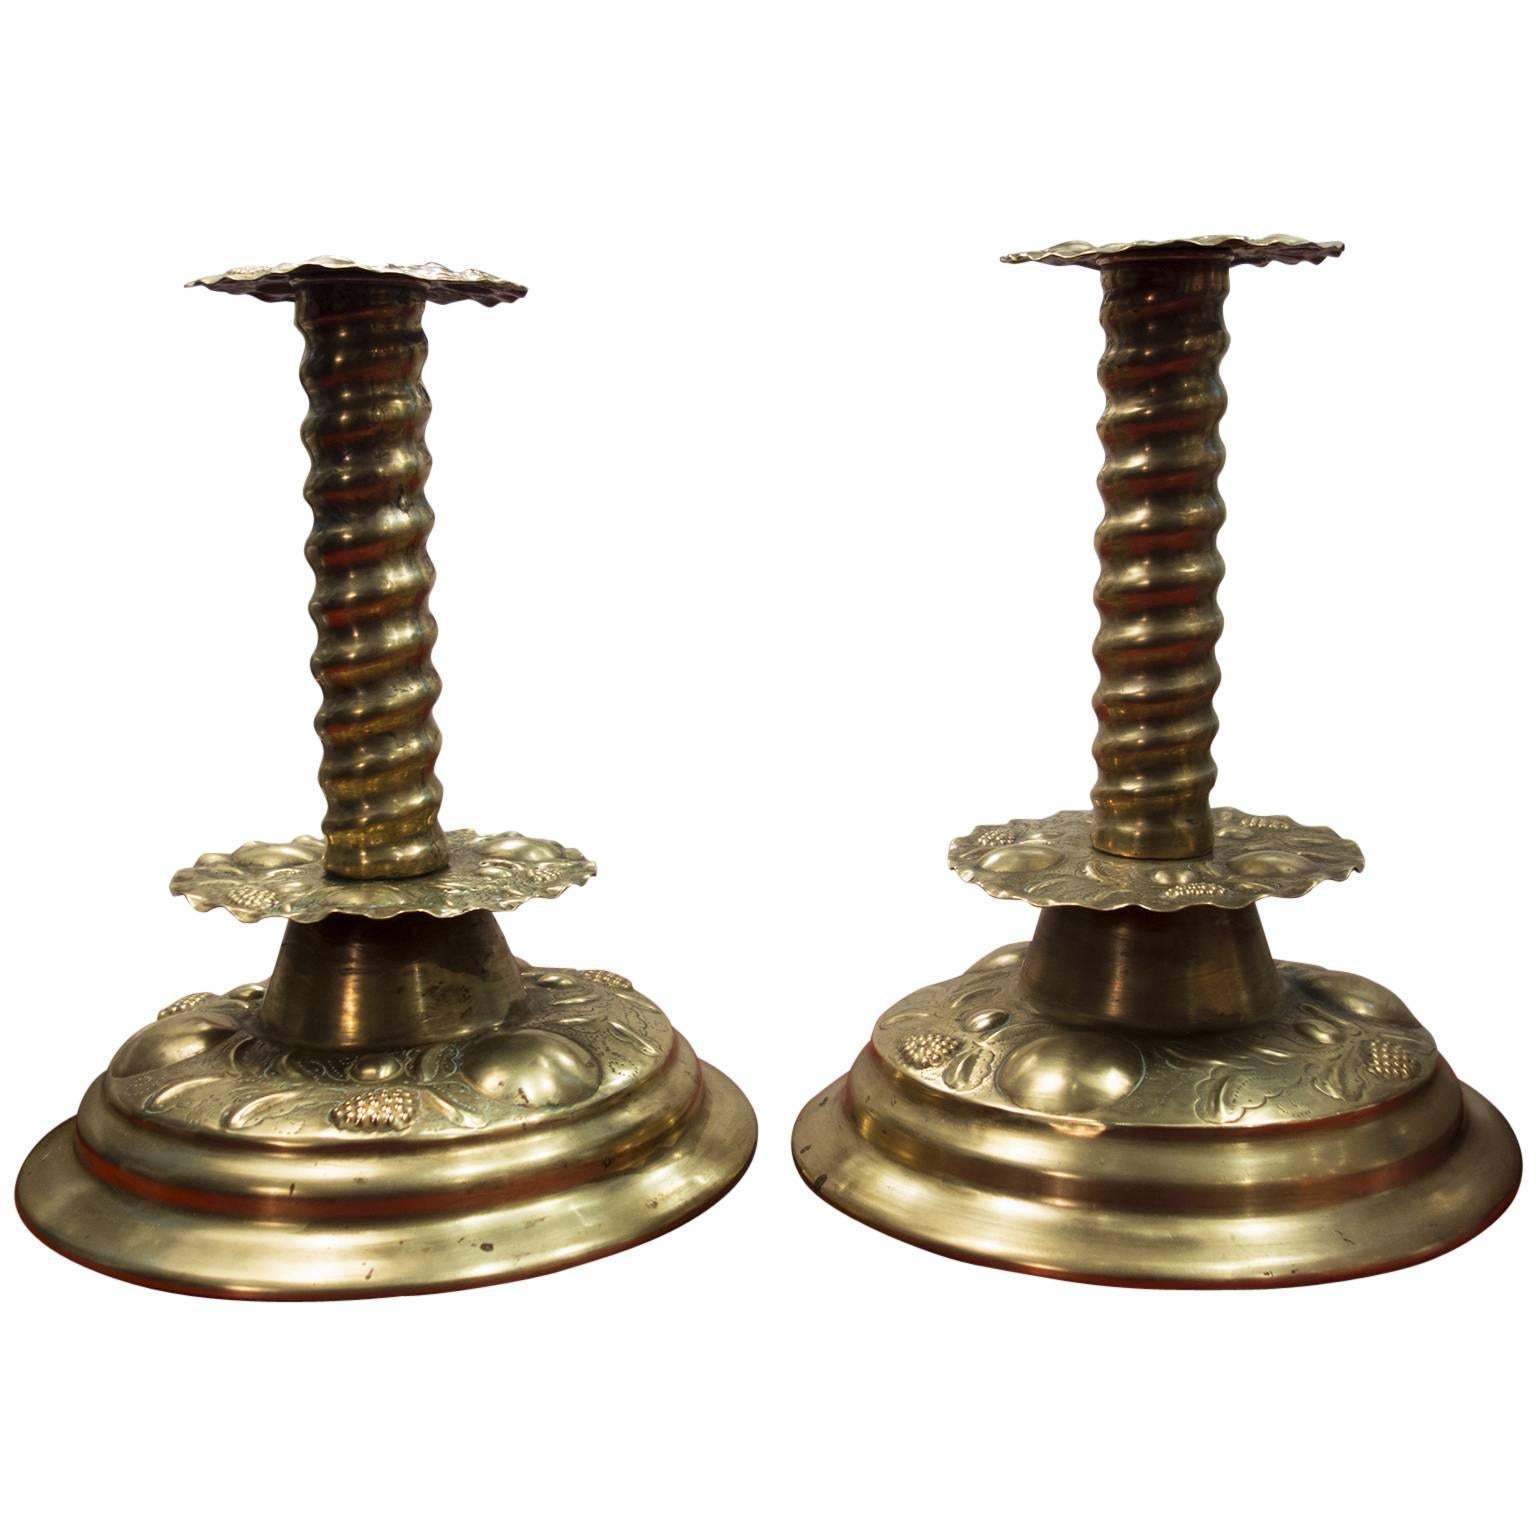 Pair of 18th Century Scandinavian Punched Brass Altar Candlesticks For Sale